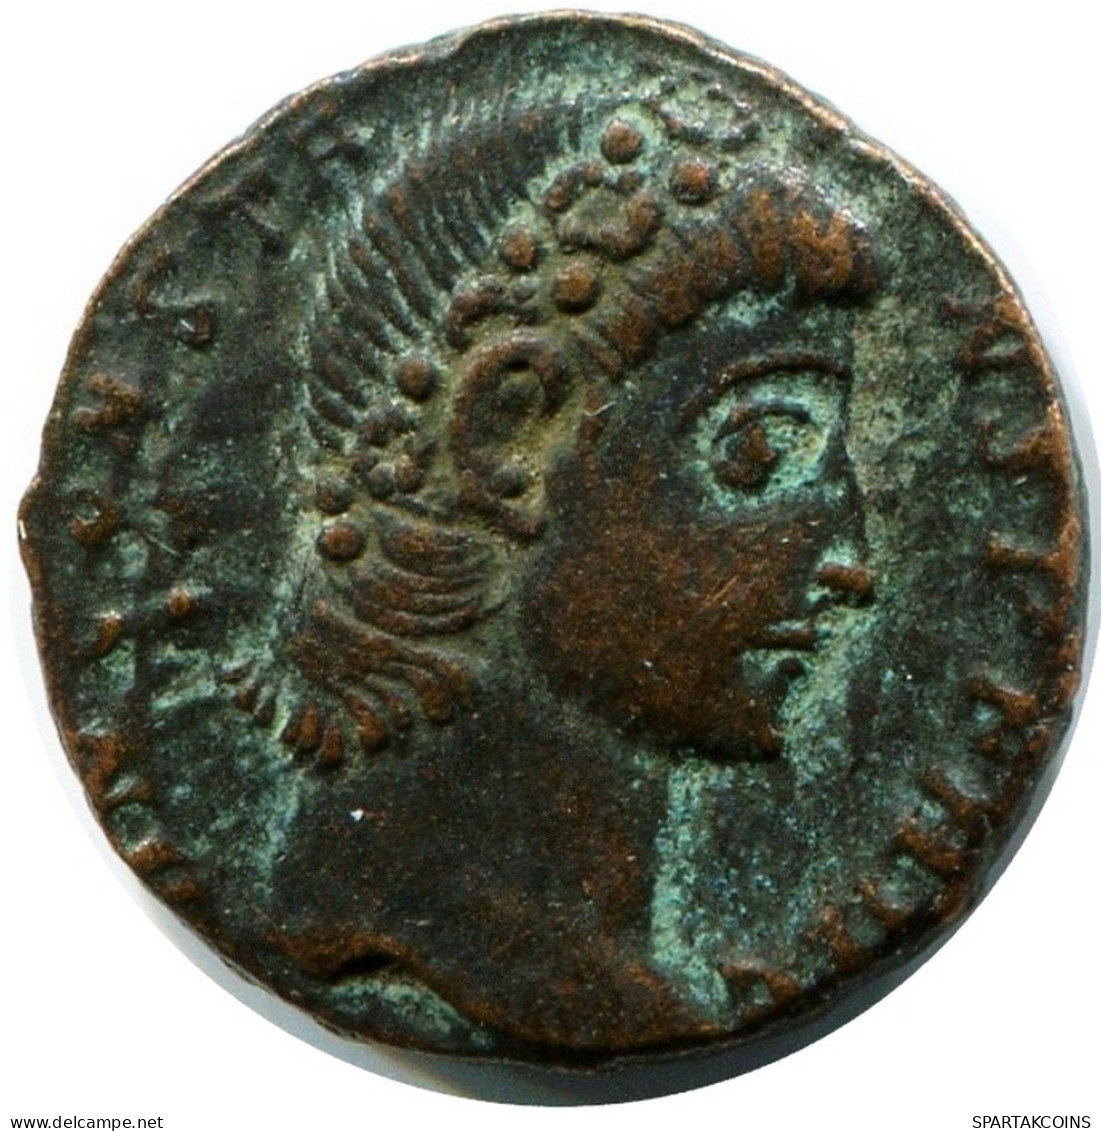 CONSTANS MINTED IN CONSTANTINOPLE FOUND IN IHNASYAH HOARD EGYPT #ANC11922.14.F.A - El Impero Christiano (307 / 363)